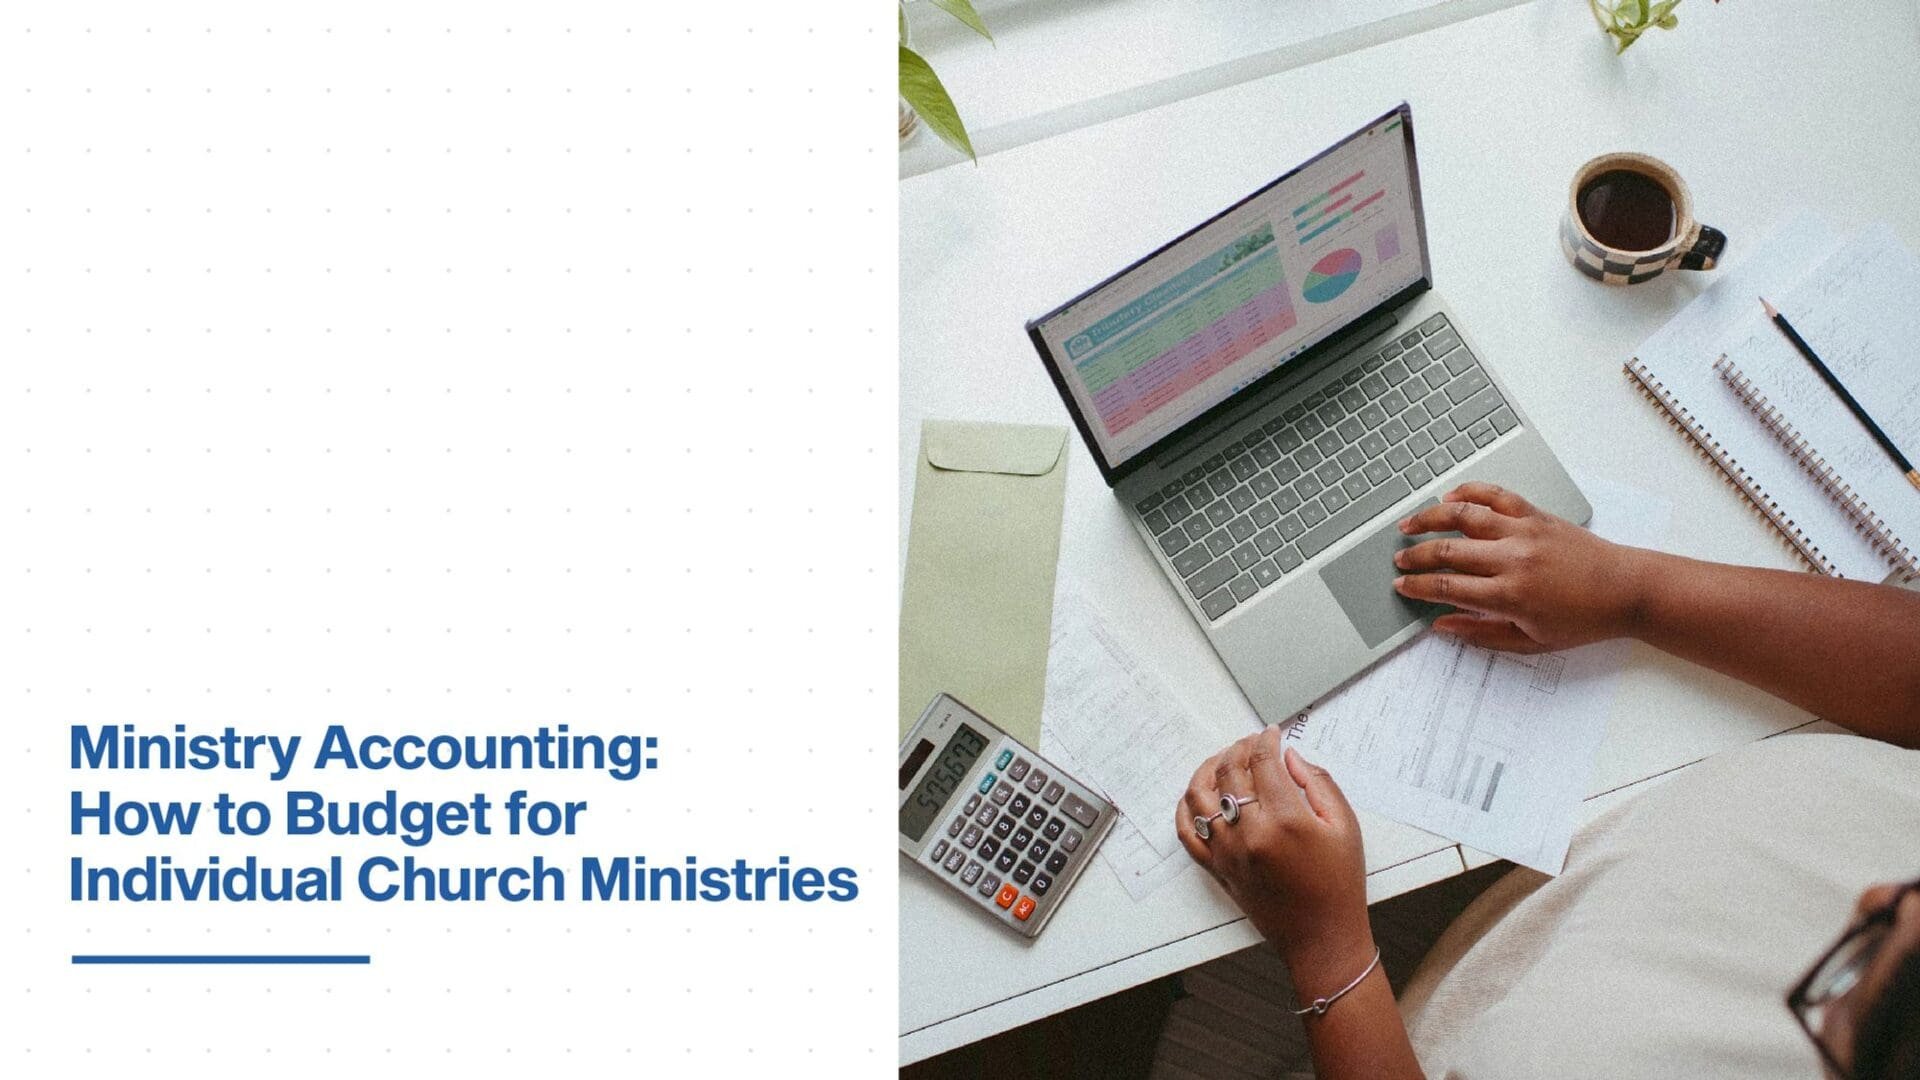 Accounting for ministries